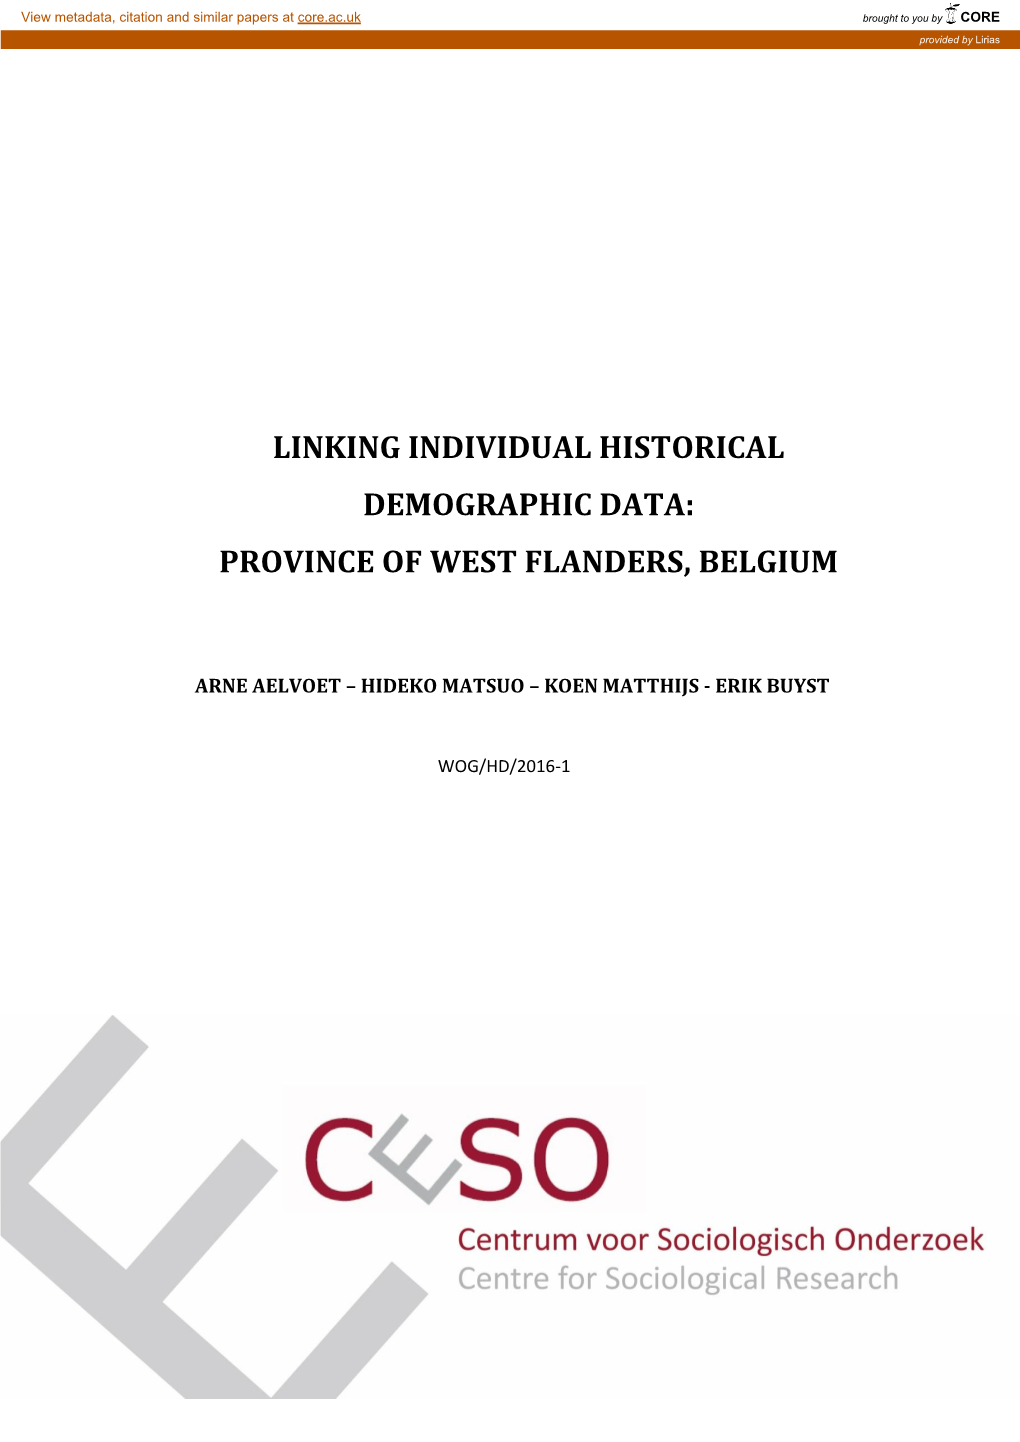 Linking Individual Historical Demographic Data: Province of West Flanders, Belgium